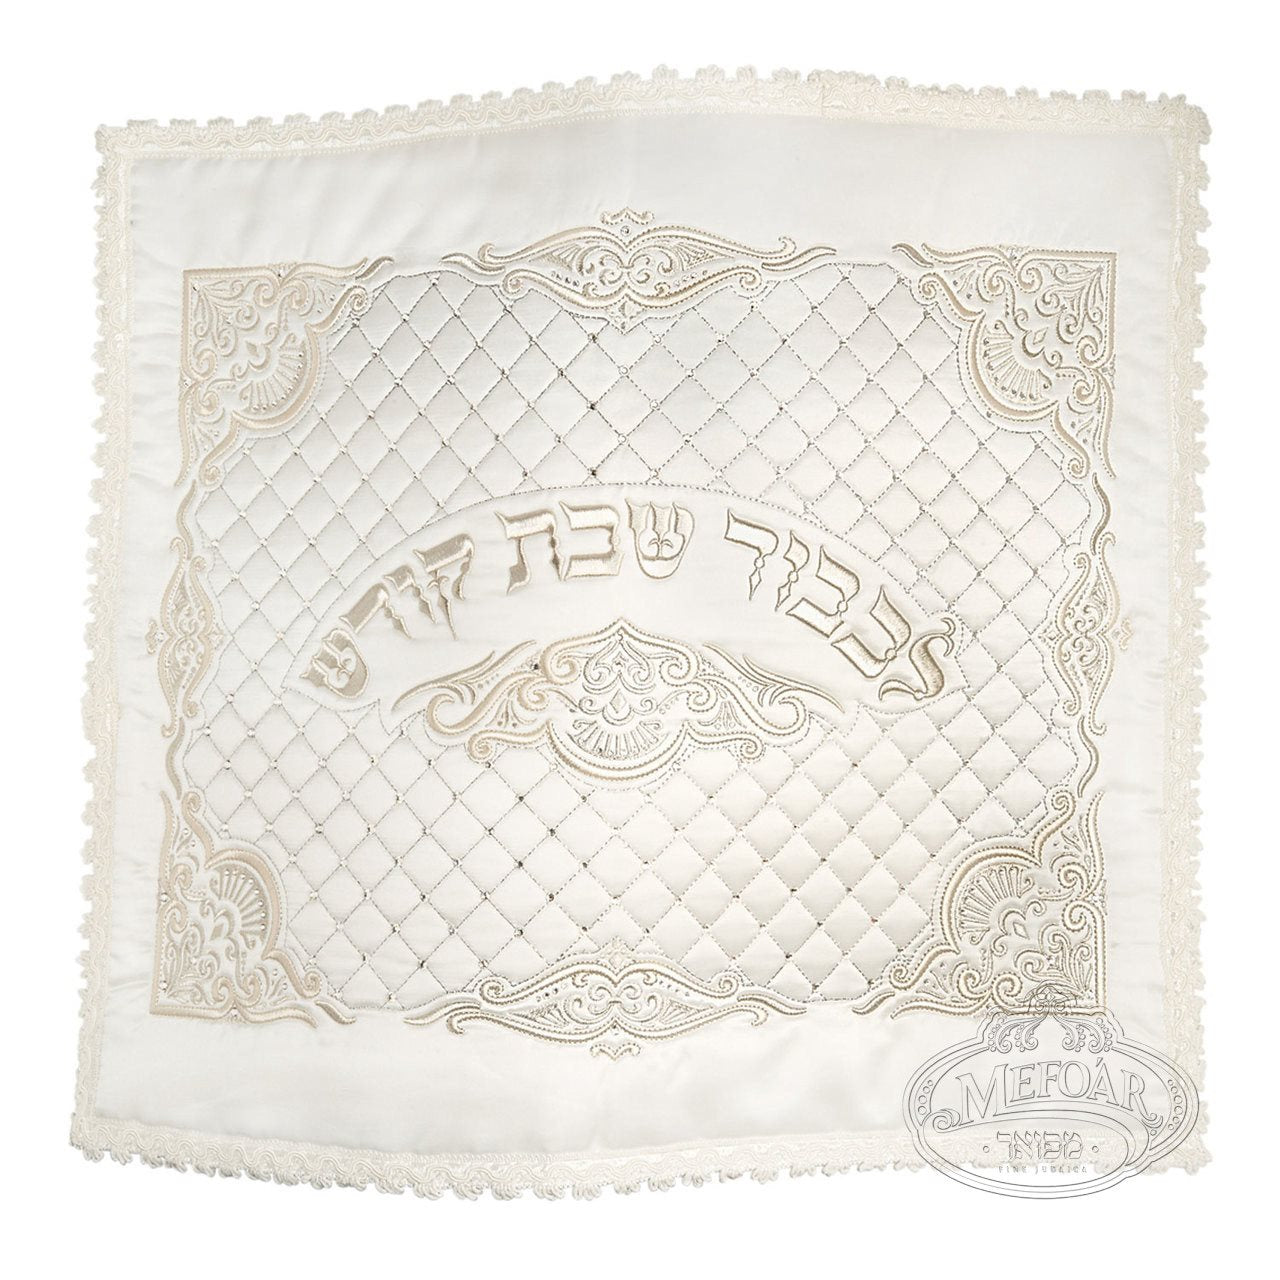 Crystal Quilted L'kovod Shabbos Challah Cover - 17,5`` x 14,5``